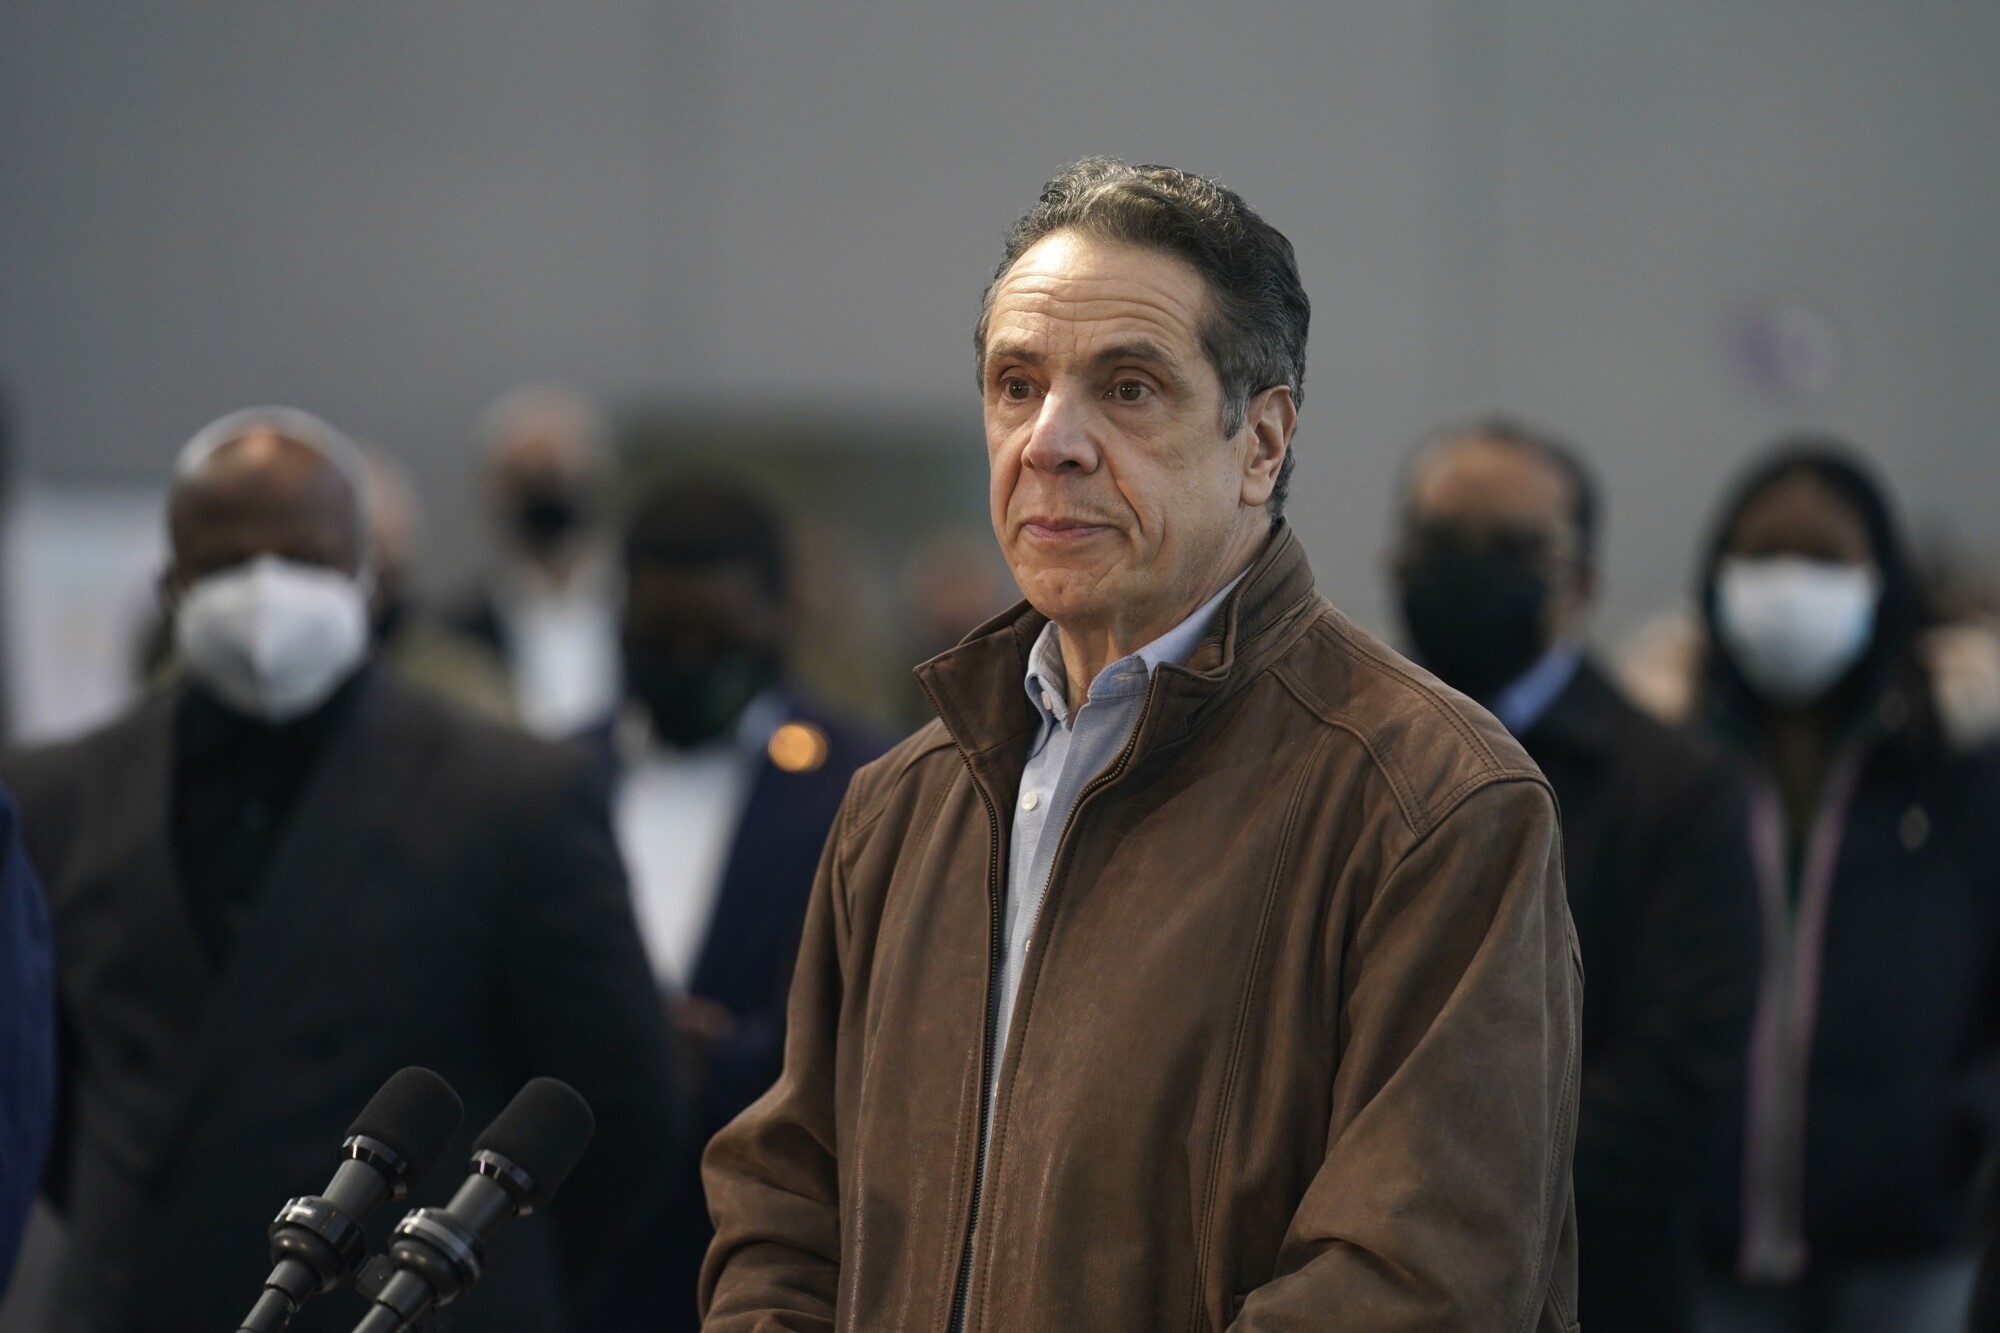 Bipartisan Support Against Governor Cuomo Mounts